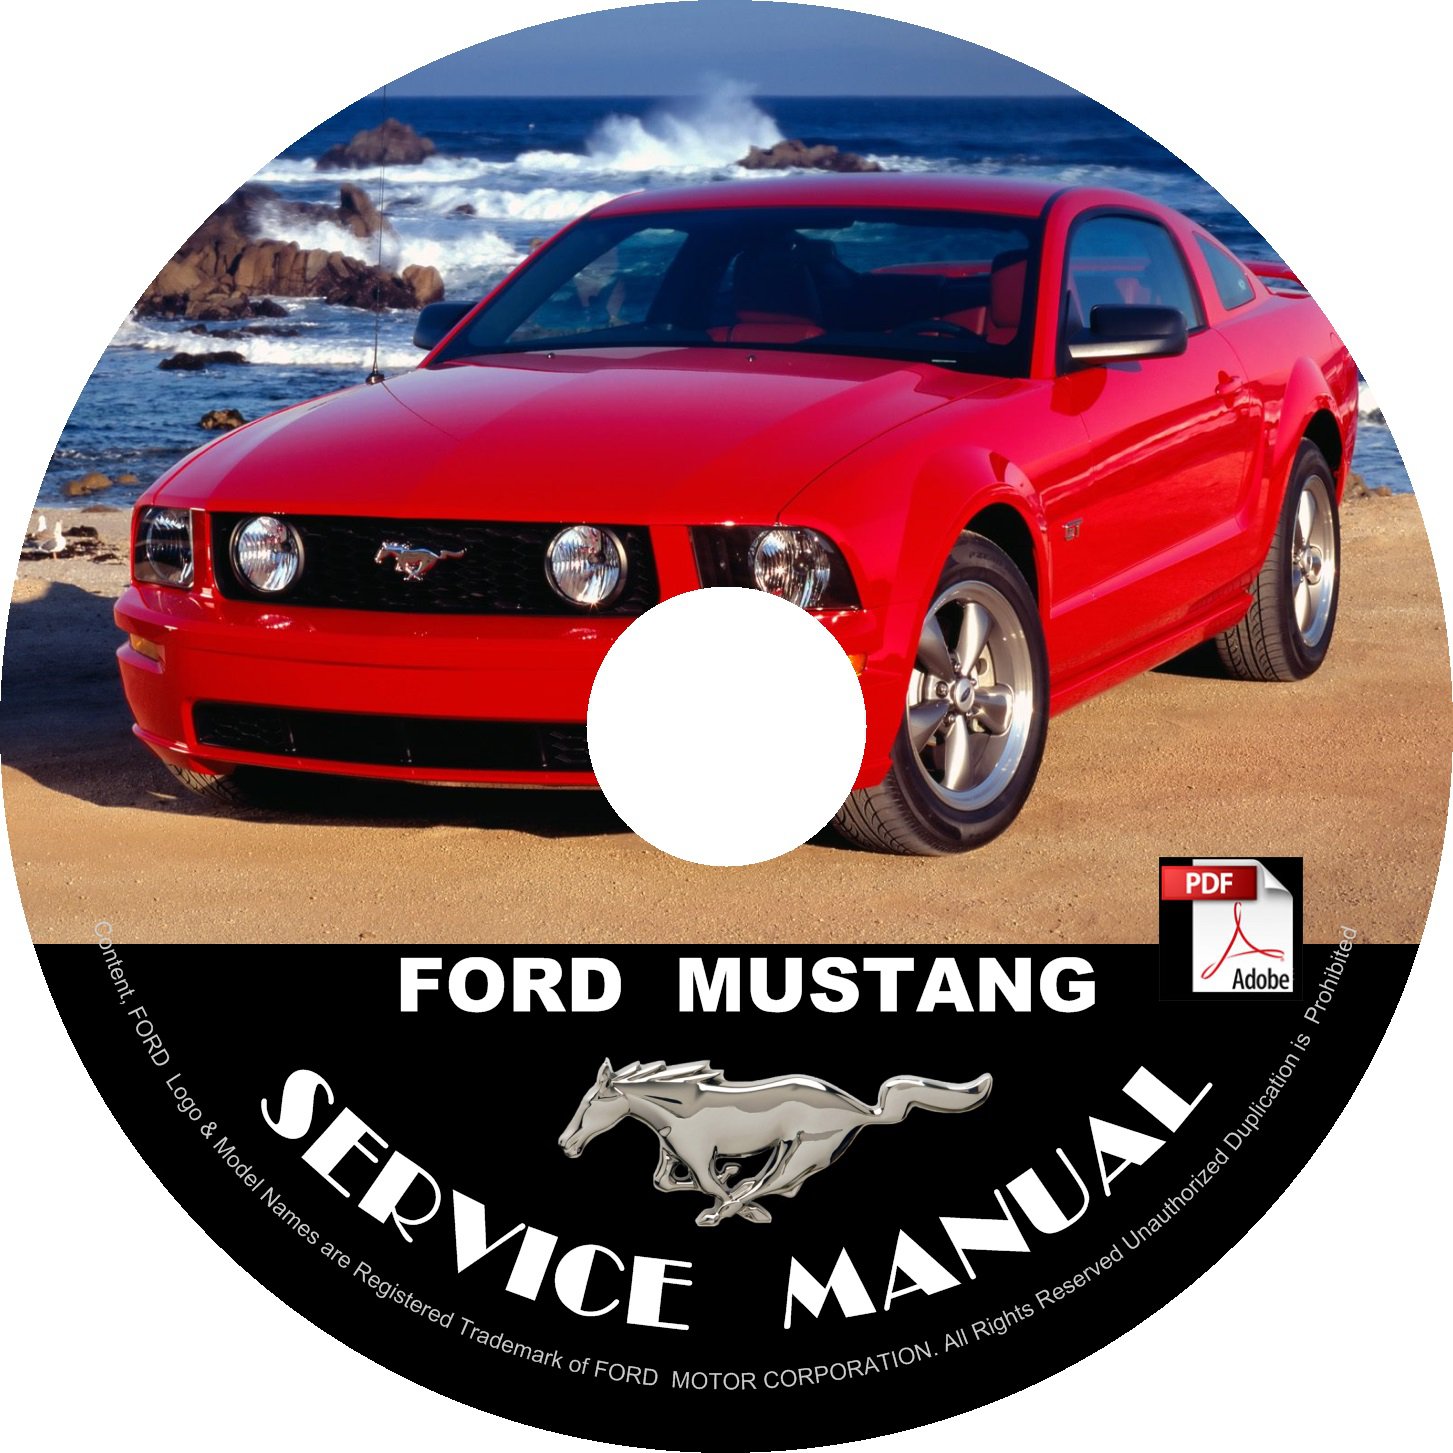 2006 ford mustang service manual download